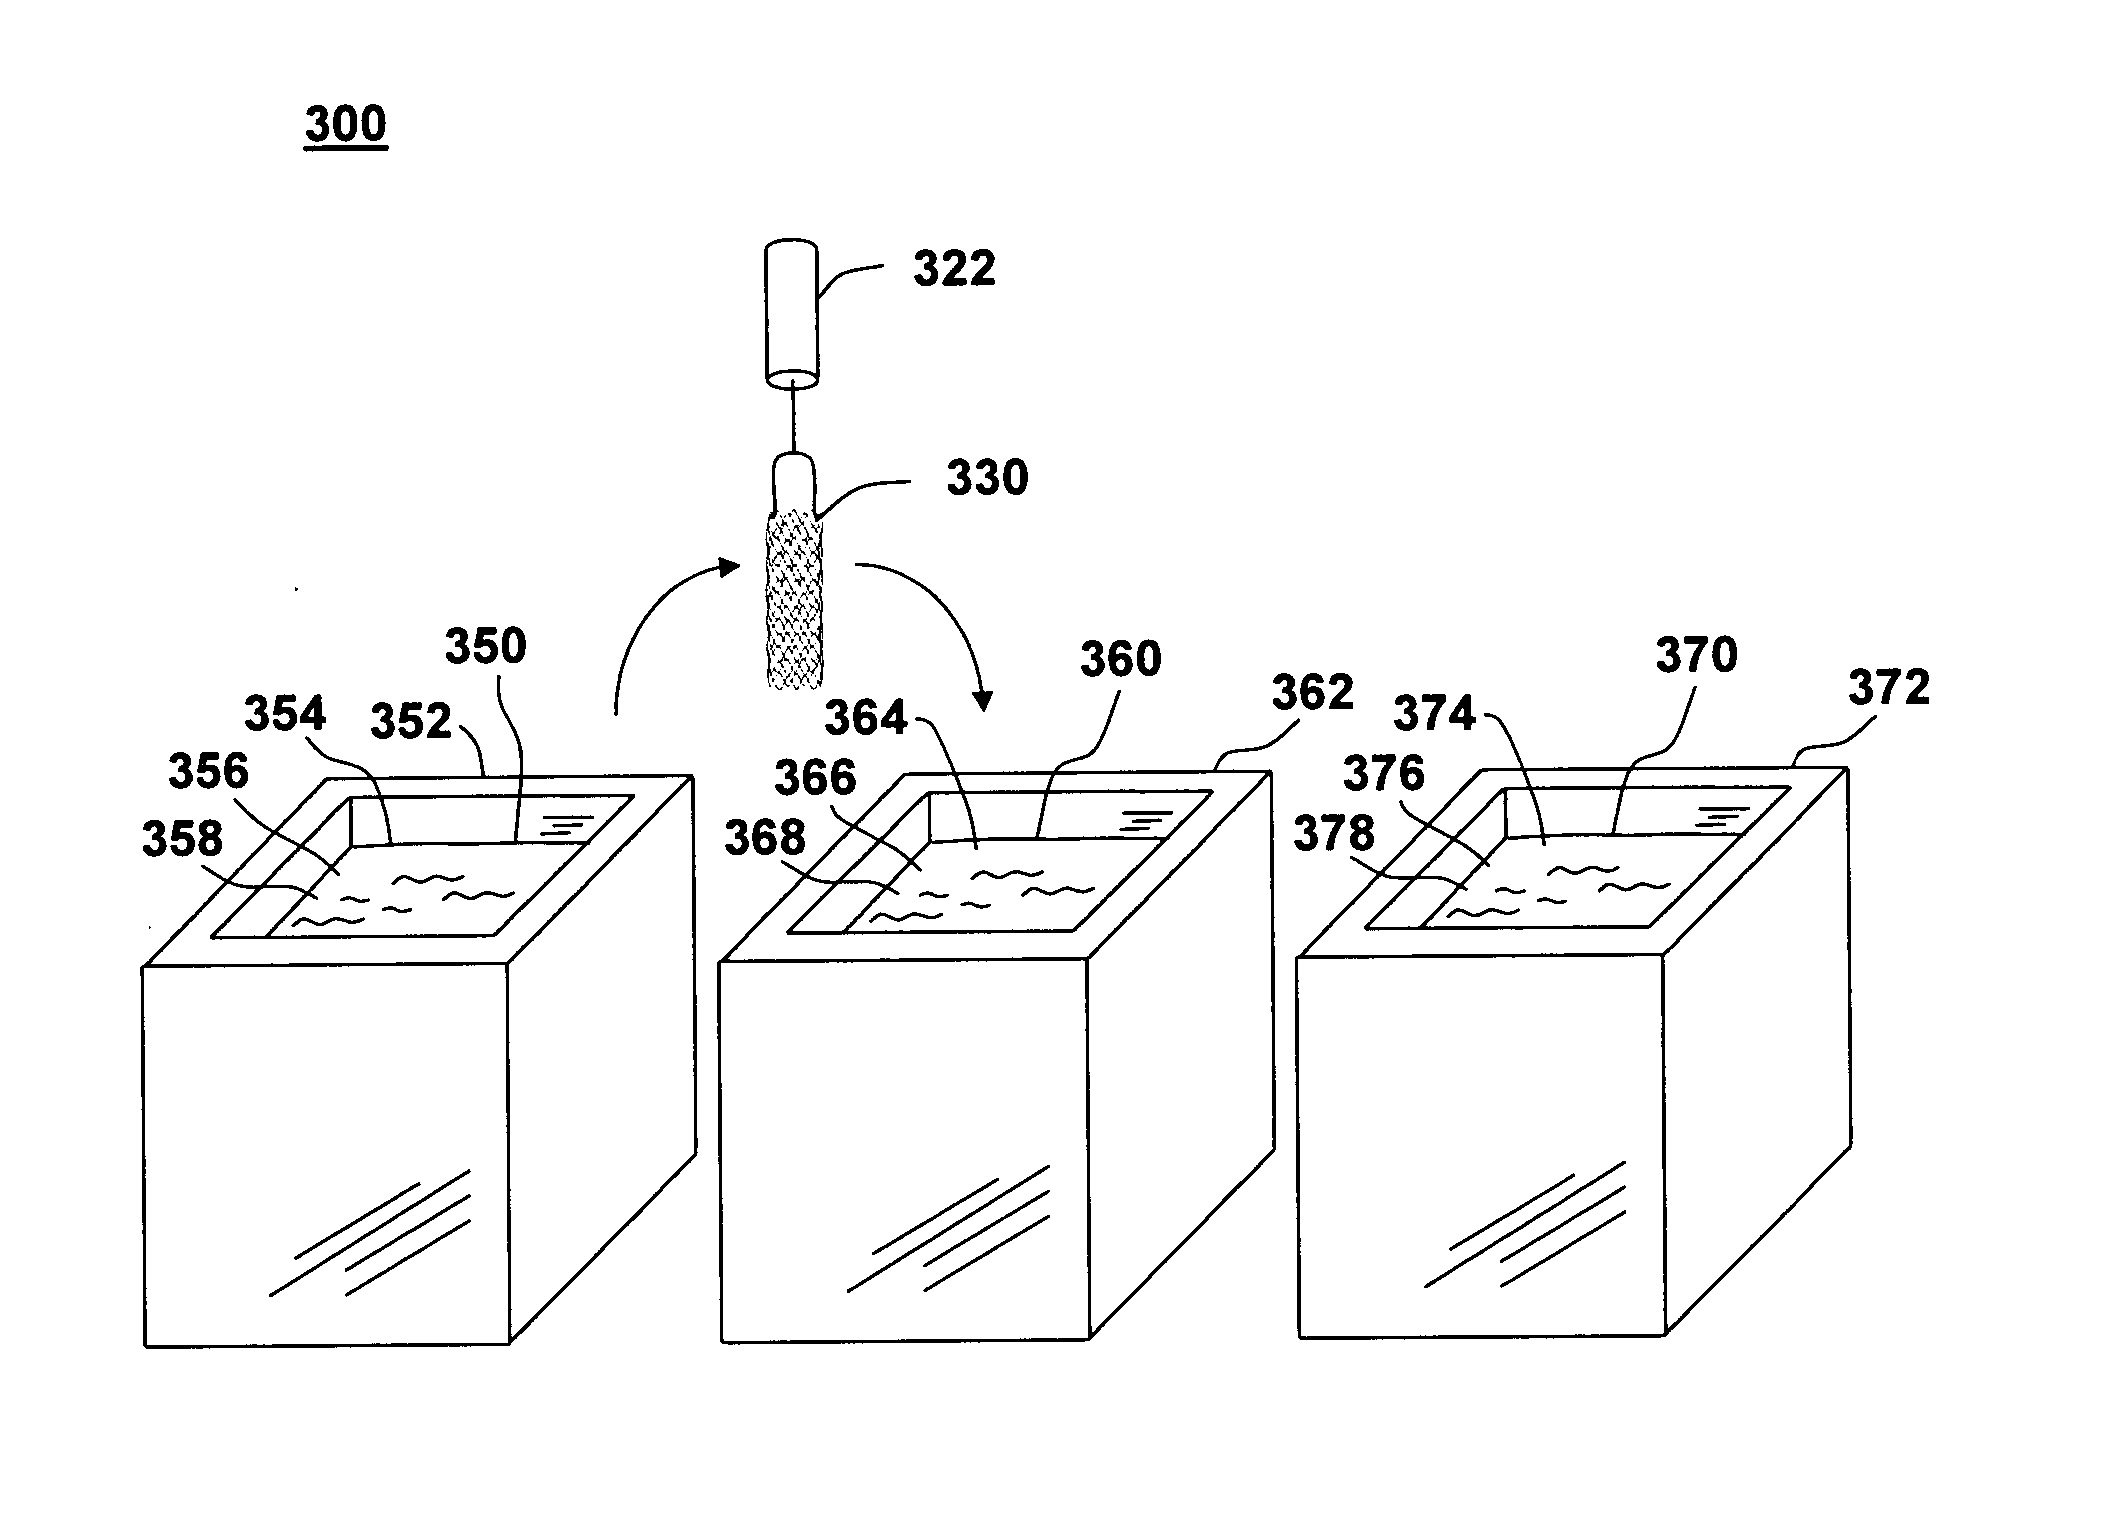 Laminated drug-polymer coated stent having dipped layers